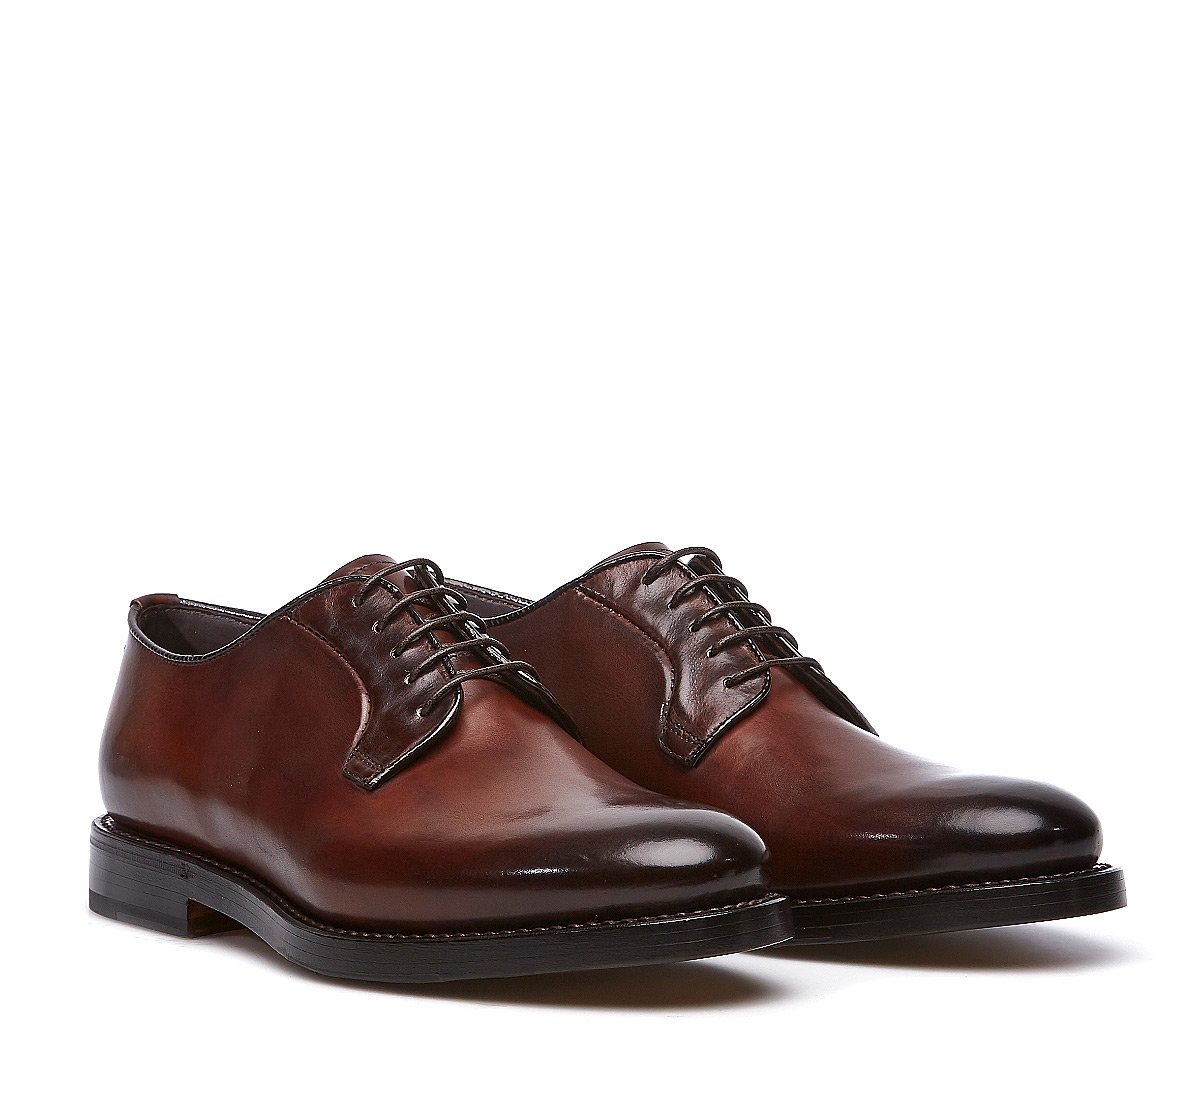 Goodyear Flex lace-ups in hand-buffed calf leather